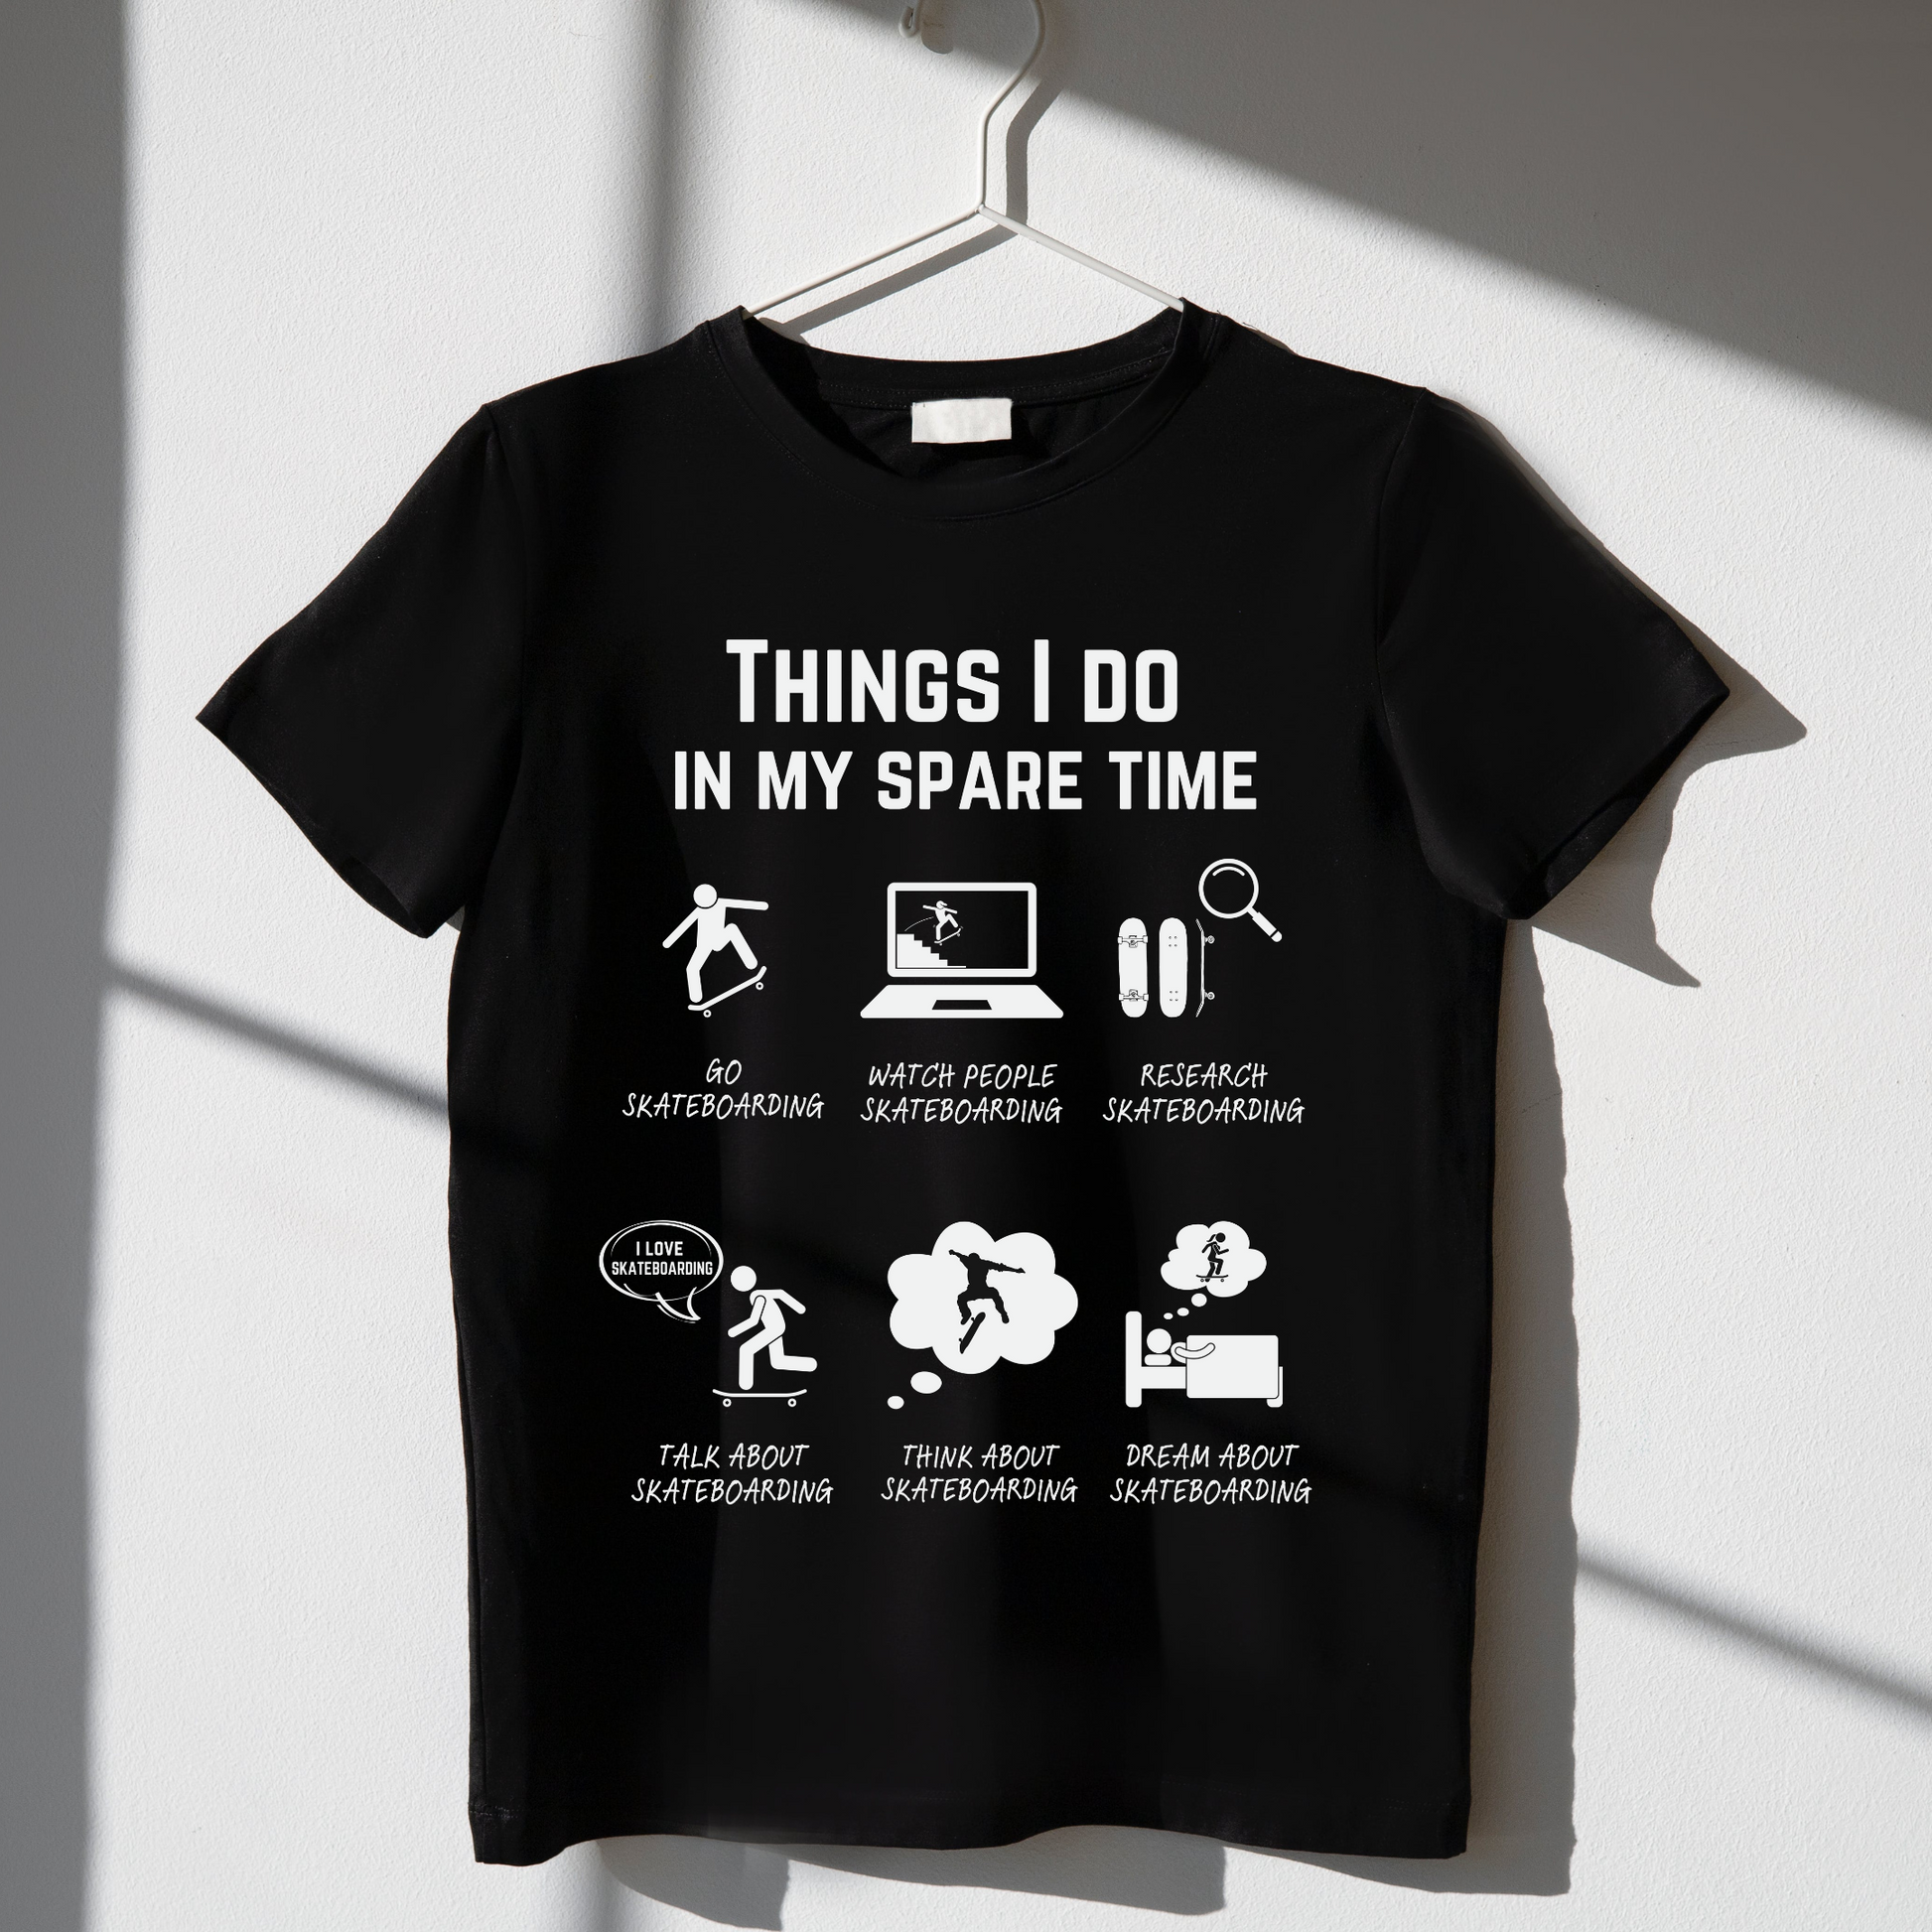 Skateboard T-Shirt - Things I do in my spare time. – BOARD-LOVER